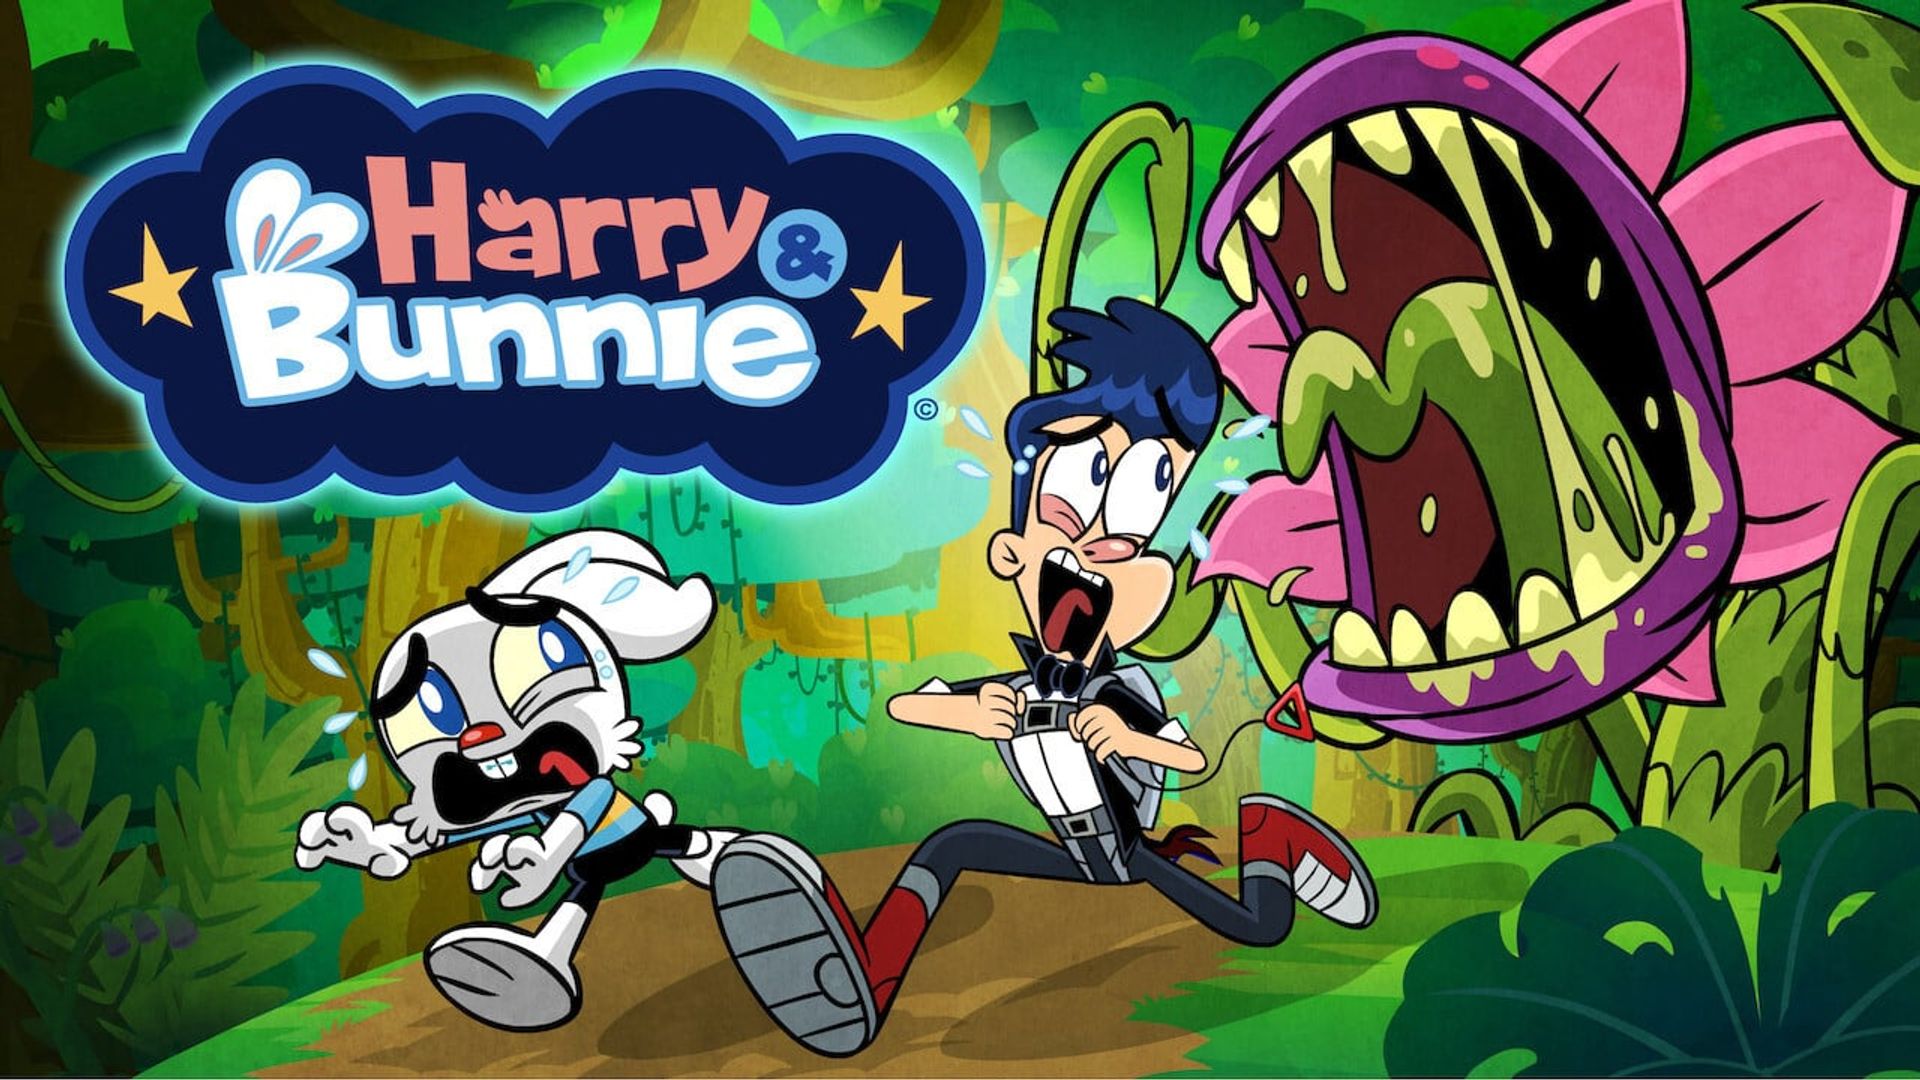 Harry & Bunnie - Where to Watch Every Episode Streaming Online | Reelgood